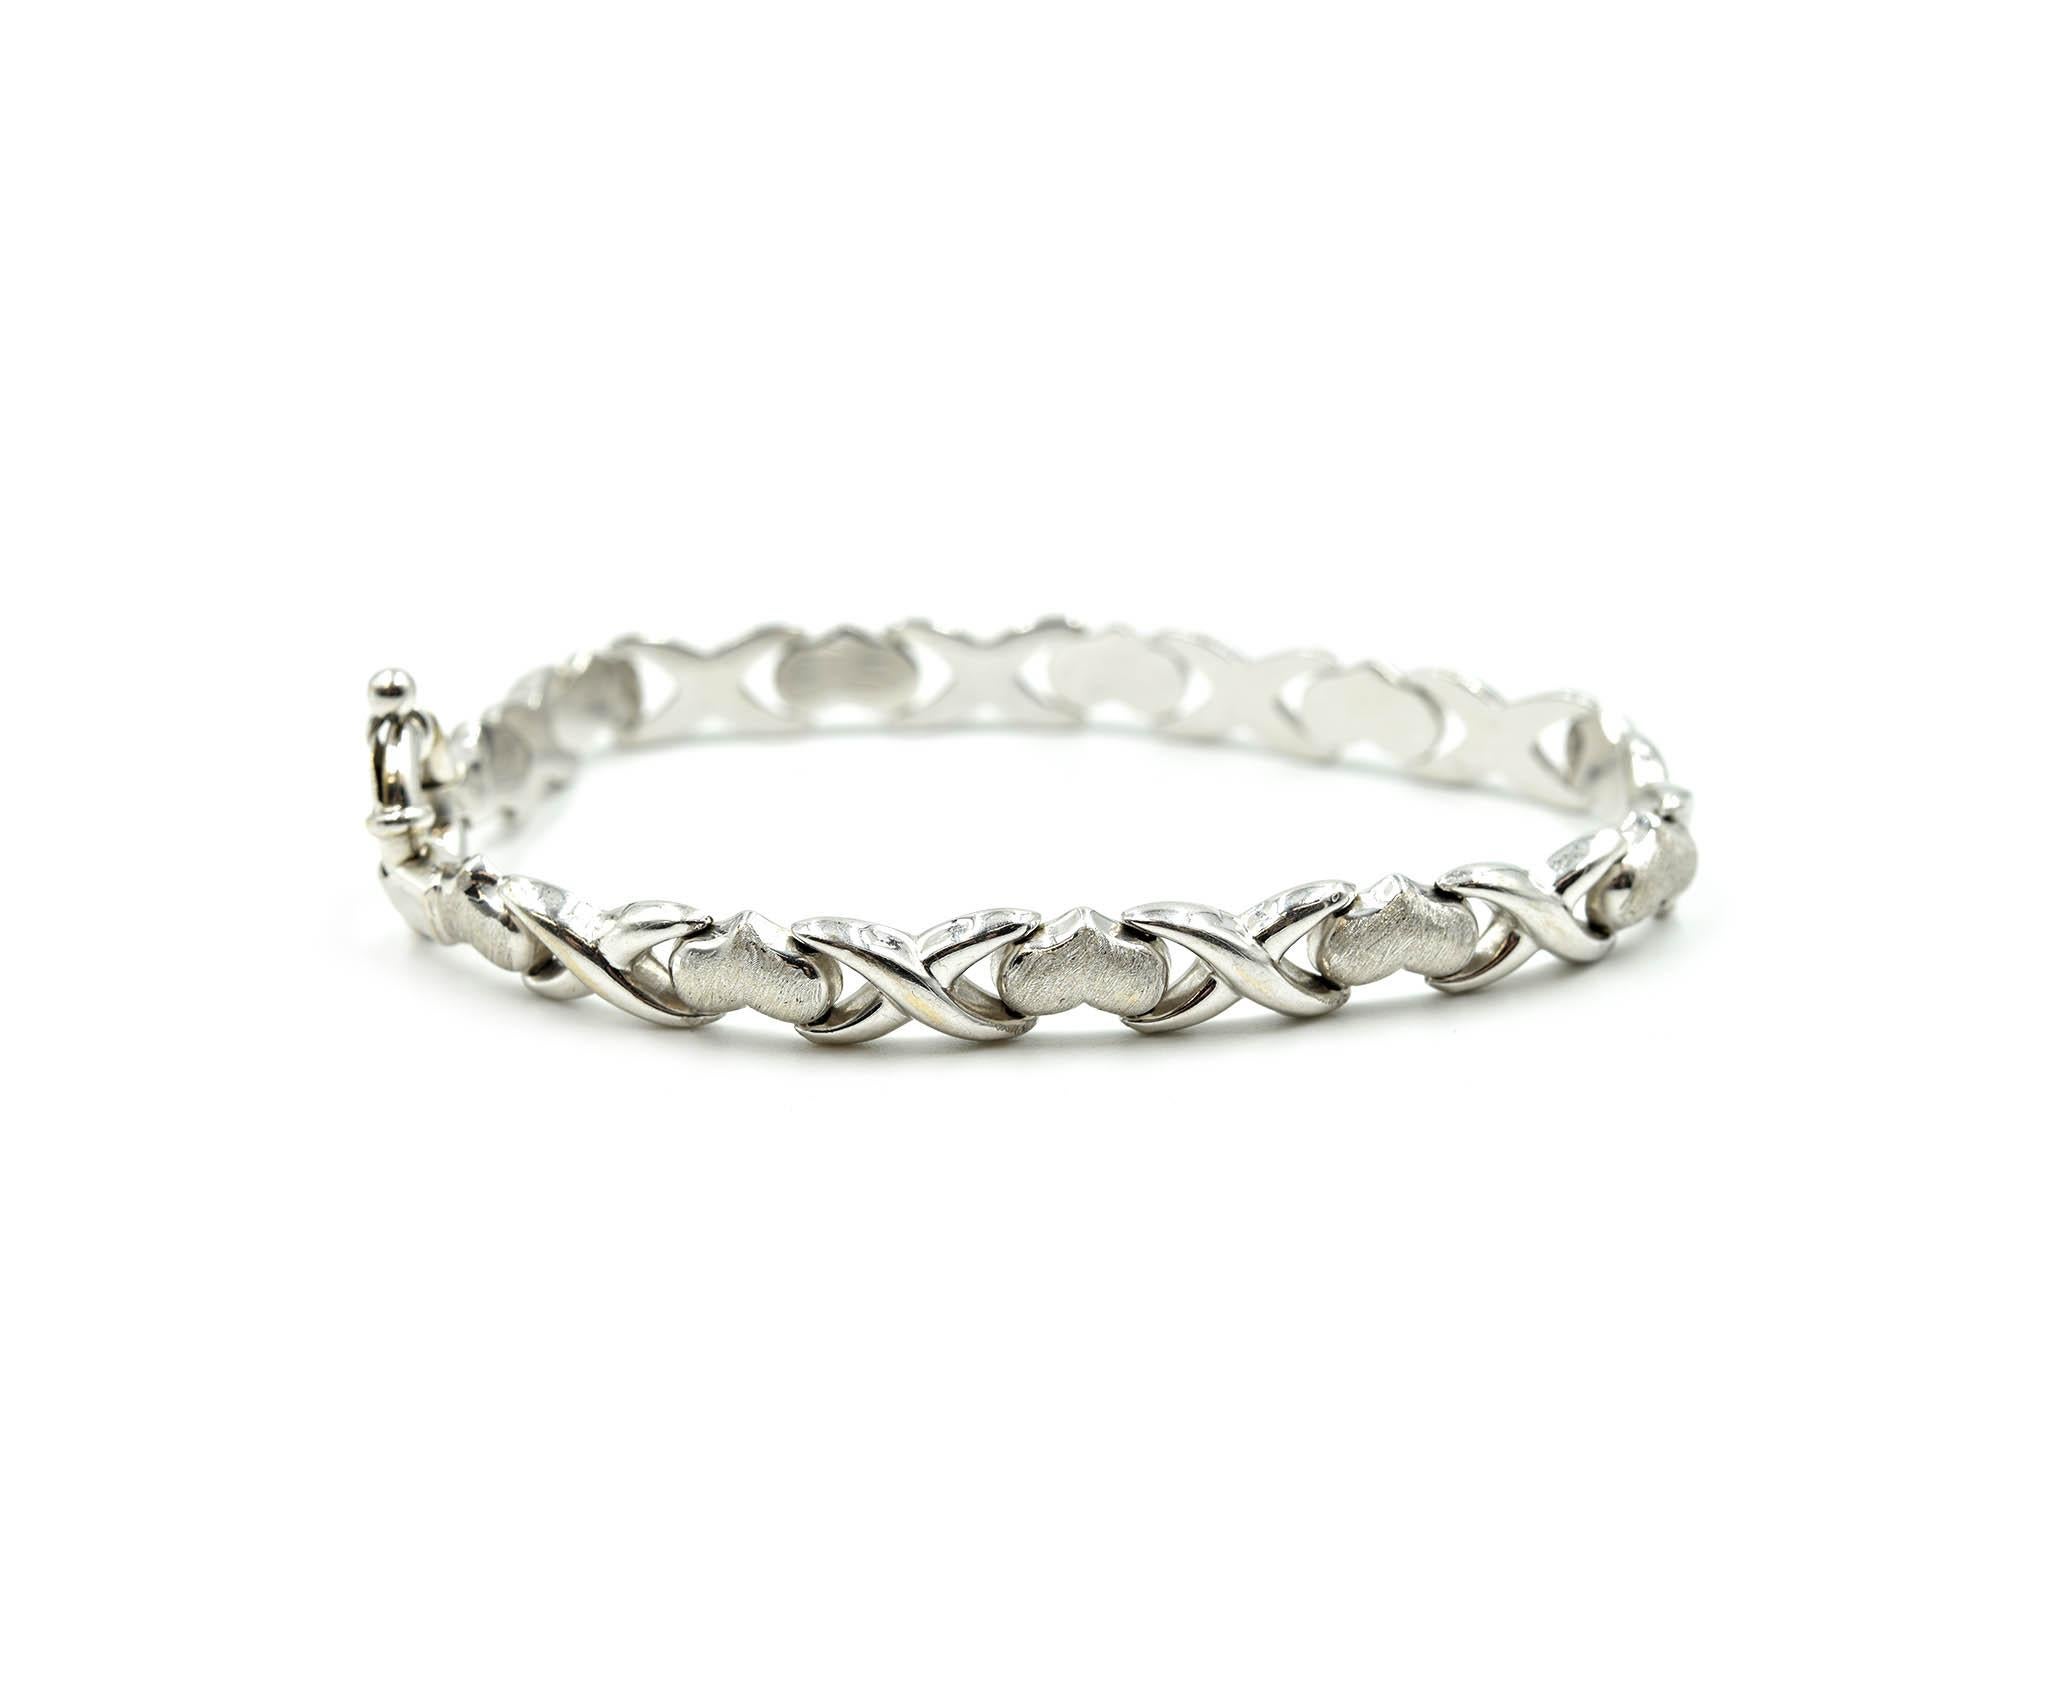 Designer: custom design
Material: 14k white gold
Dimensions: bracelet is 7 inches long and 1/4th an inch wide
Weight: 9.40 grams
